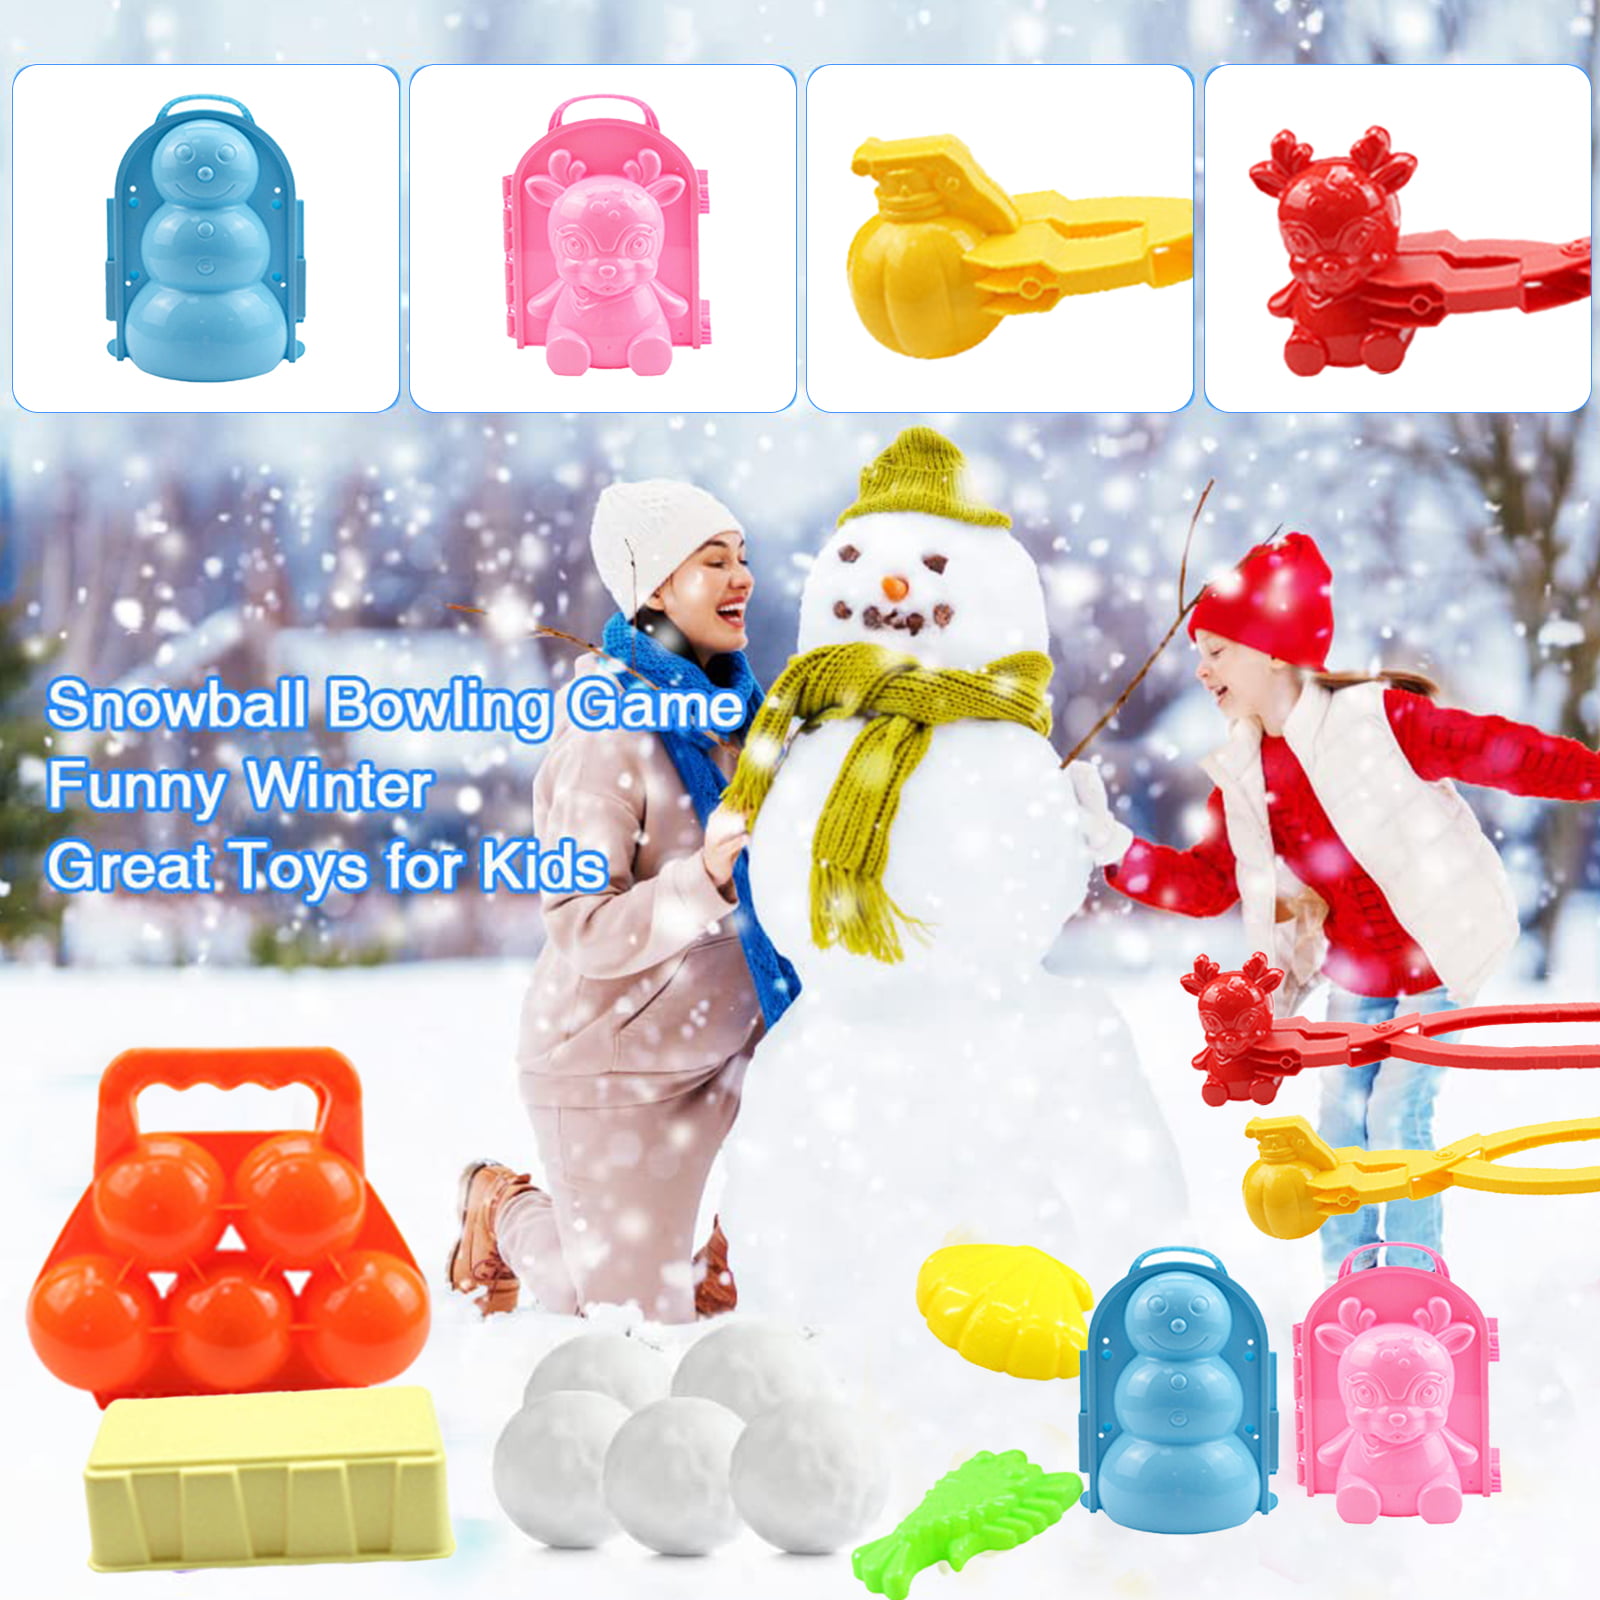 Snowball Maker Tool Snowball Clip Winter Snow Toy for Fun Snow Activities  Snow Play Easy Snowball Making Tool with Vibrant Colors Ergonomic Handle